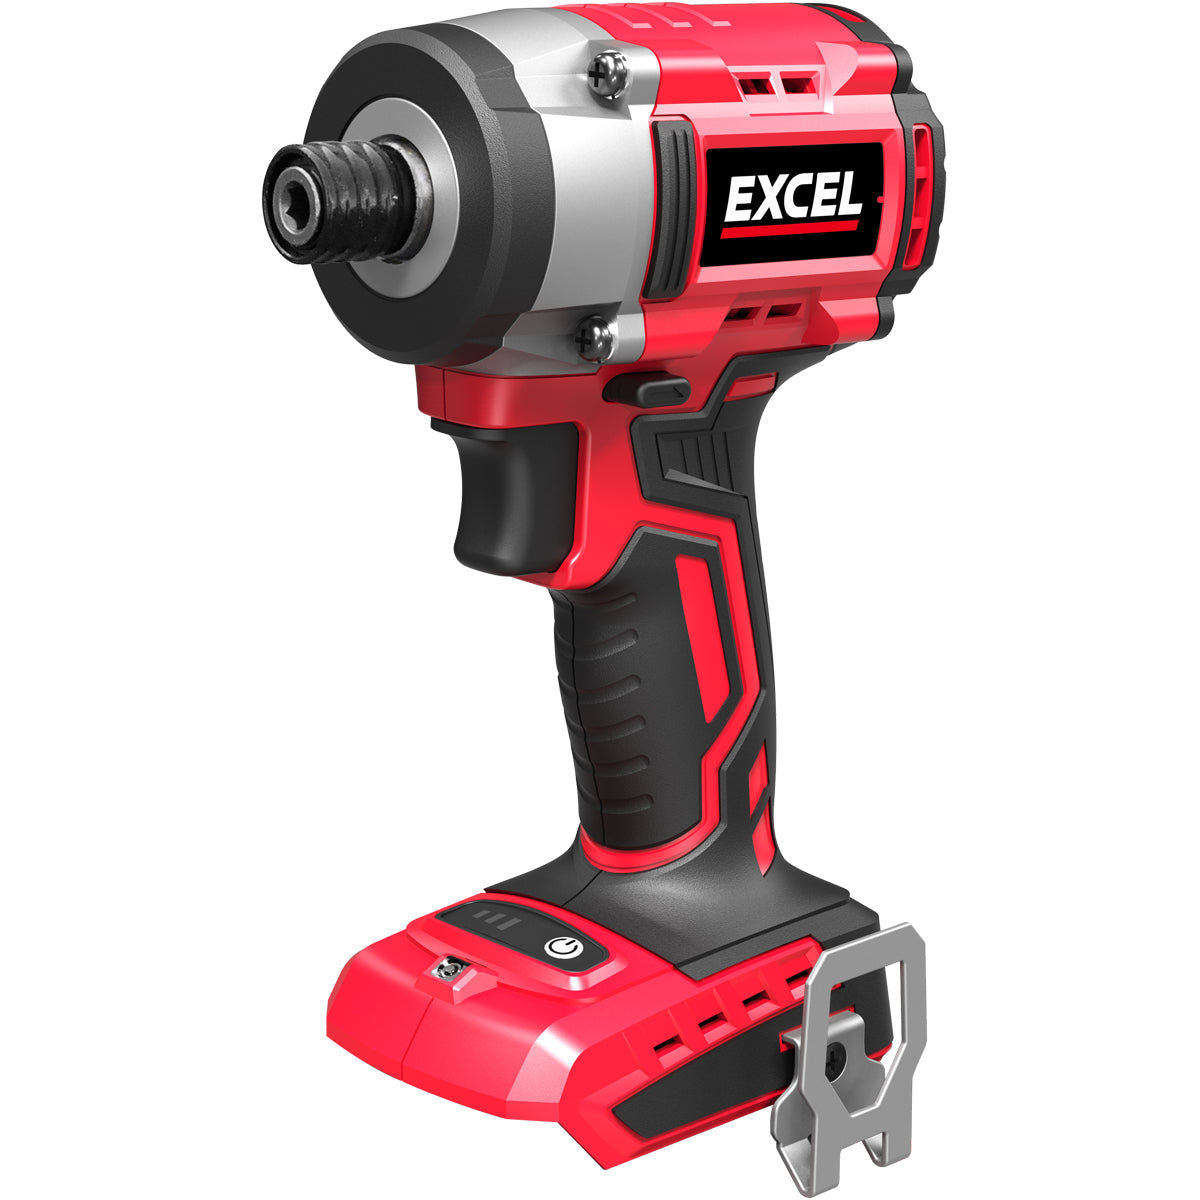 Excel 18V Brushless Impact Driver Body Only (Battery & Charger Not Included)